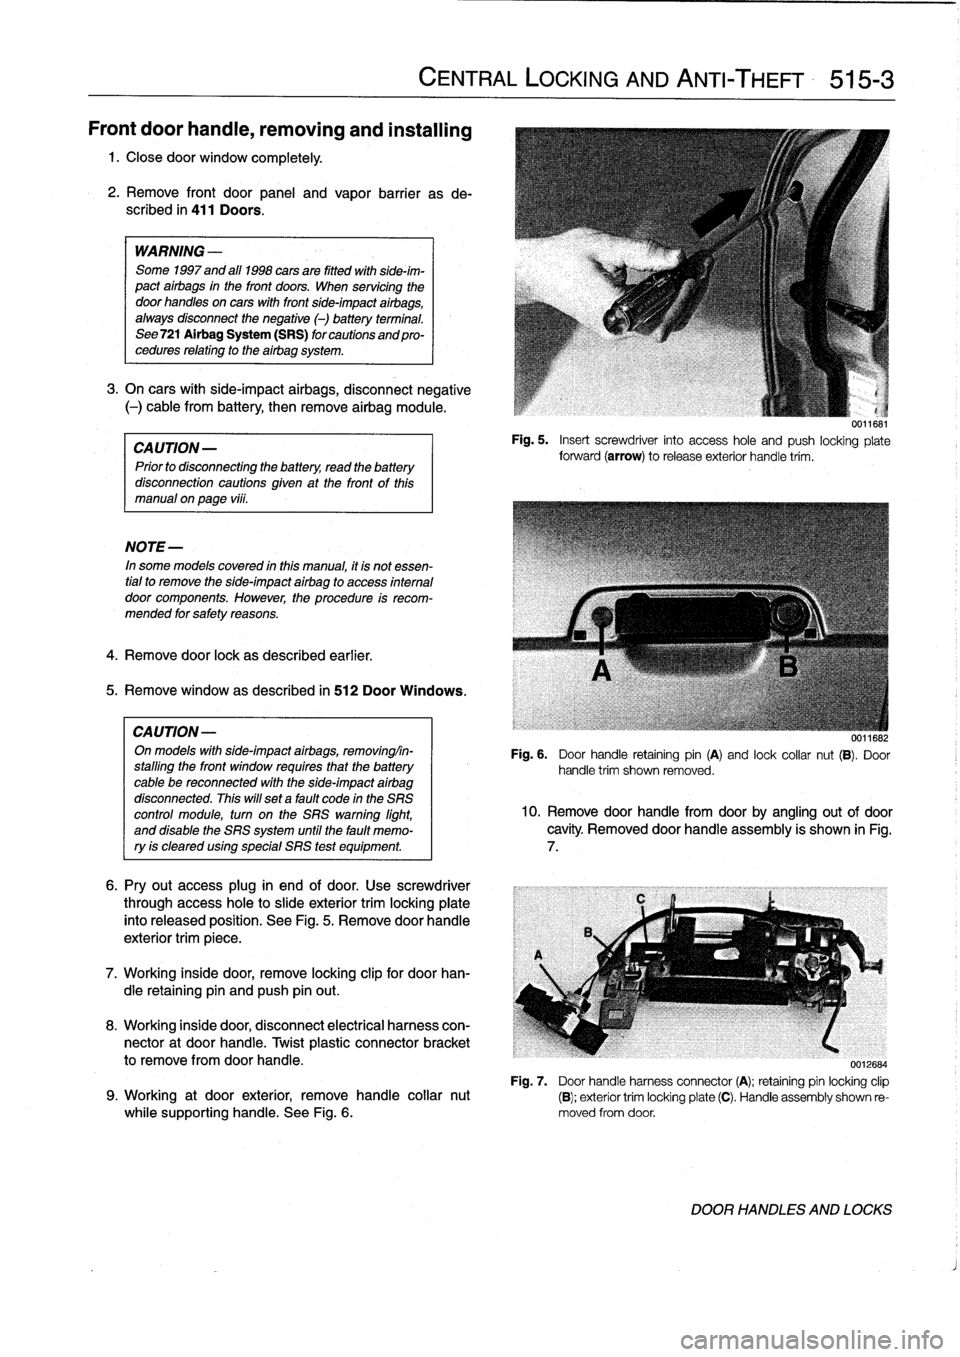 BMW 318i 1996 E36 Owners Guide 
Front
door
handle,
removing
and
installing

1
.
Closedoor
window
completely
.

2
.
Remove
front
door
panel
and
vapor
barrier
asde-
scribed
in
411
Doors
.

WARNING
-

Some
1997
and
al]
1998
cars
are
f